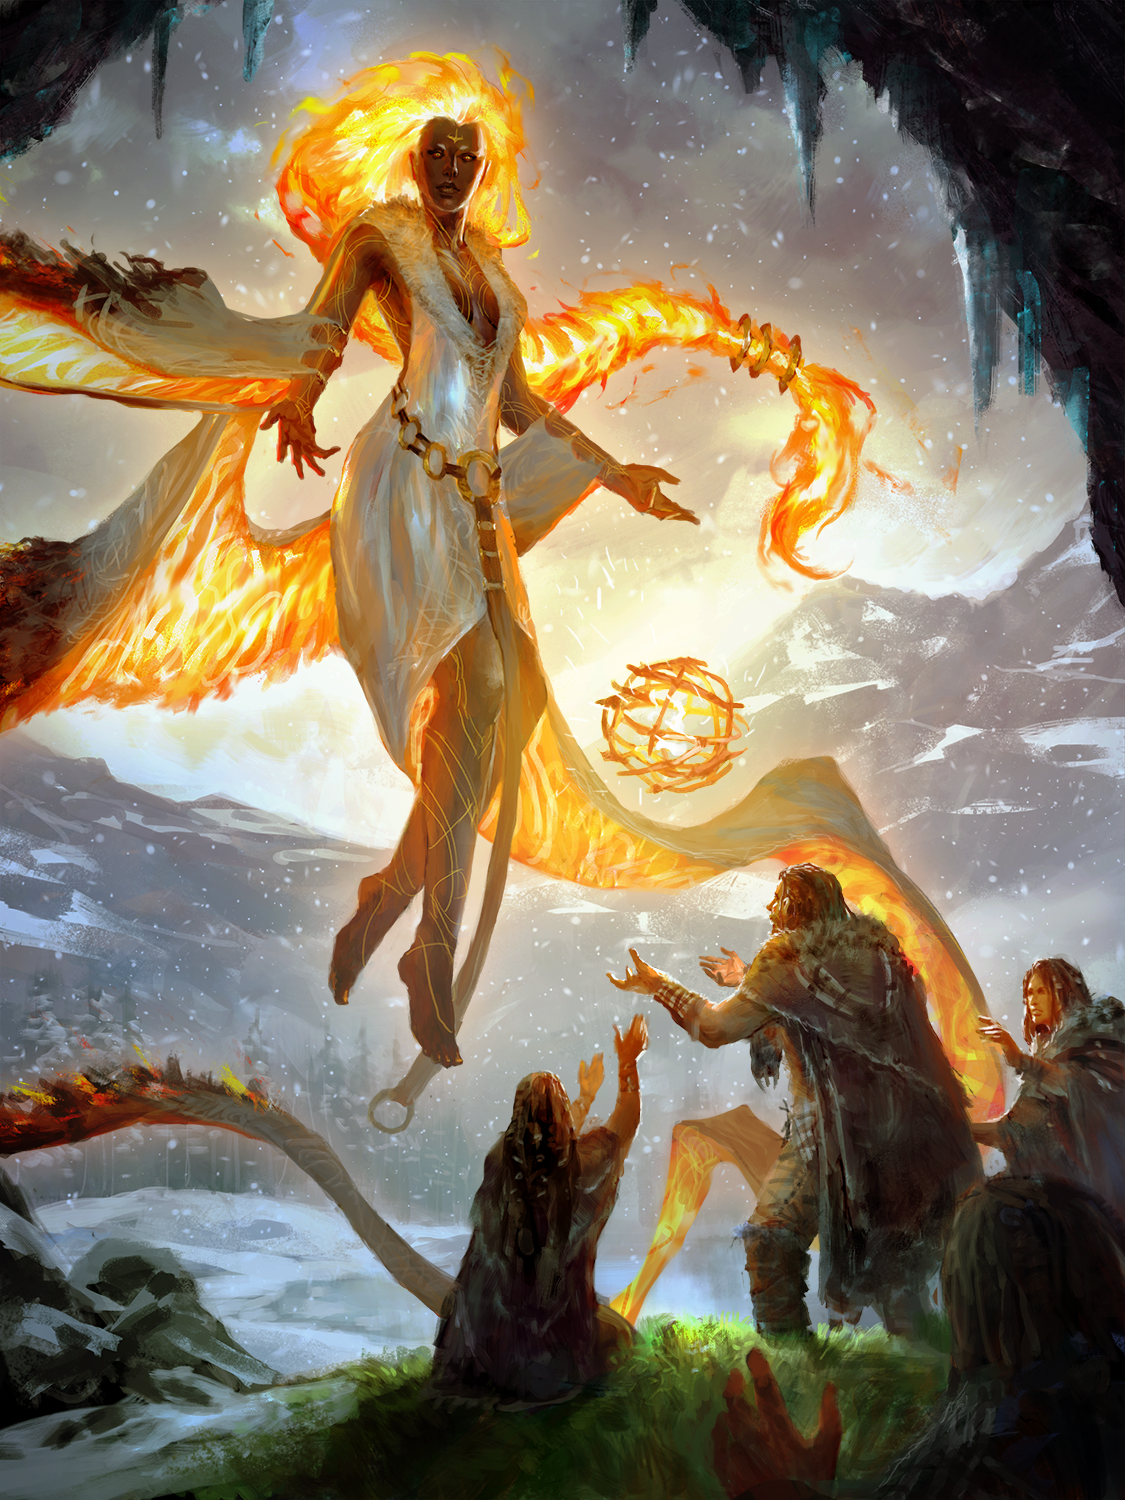 A diety in a white gown with long fiery hair floats above a group of humans dressed in furs, offering them a ball of fire